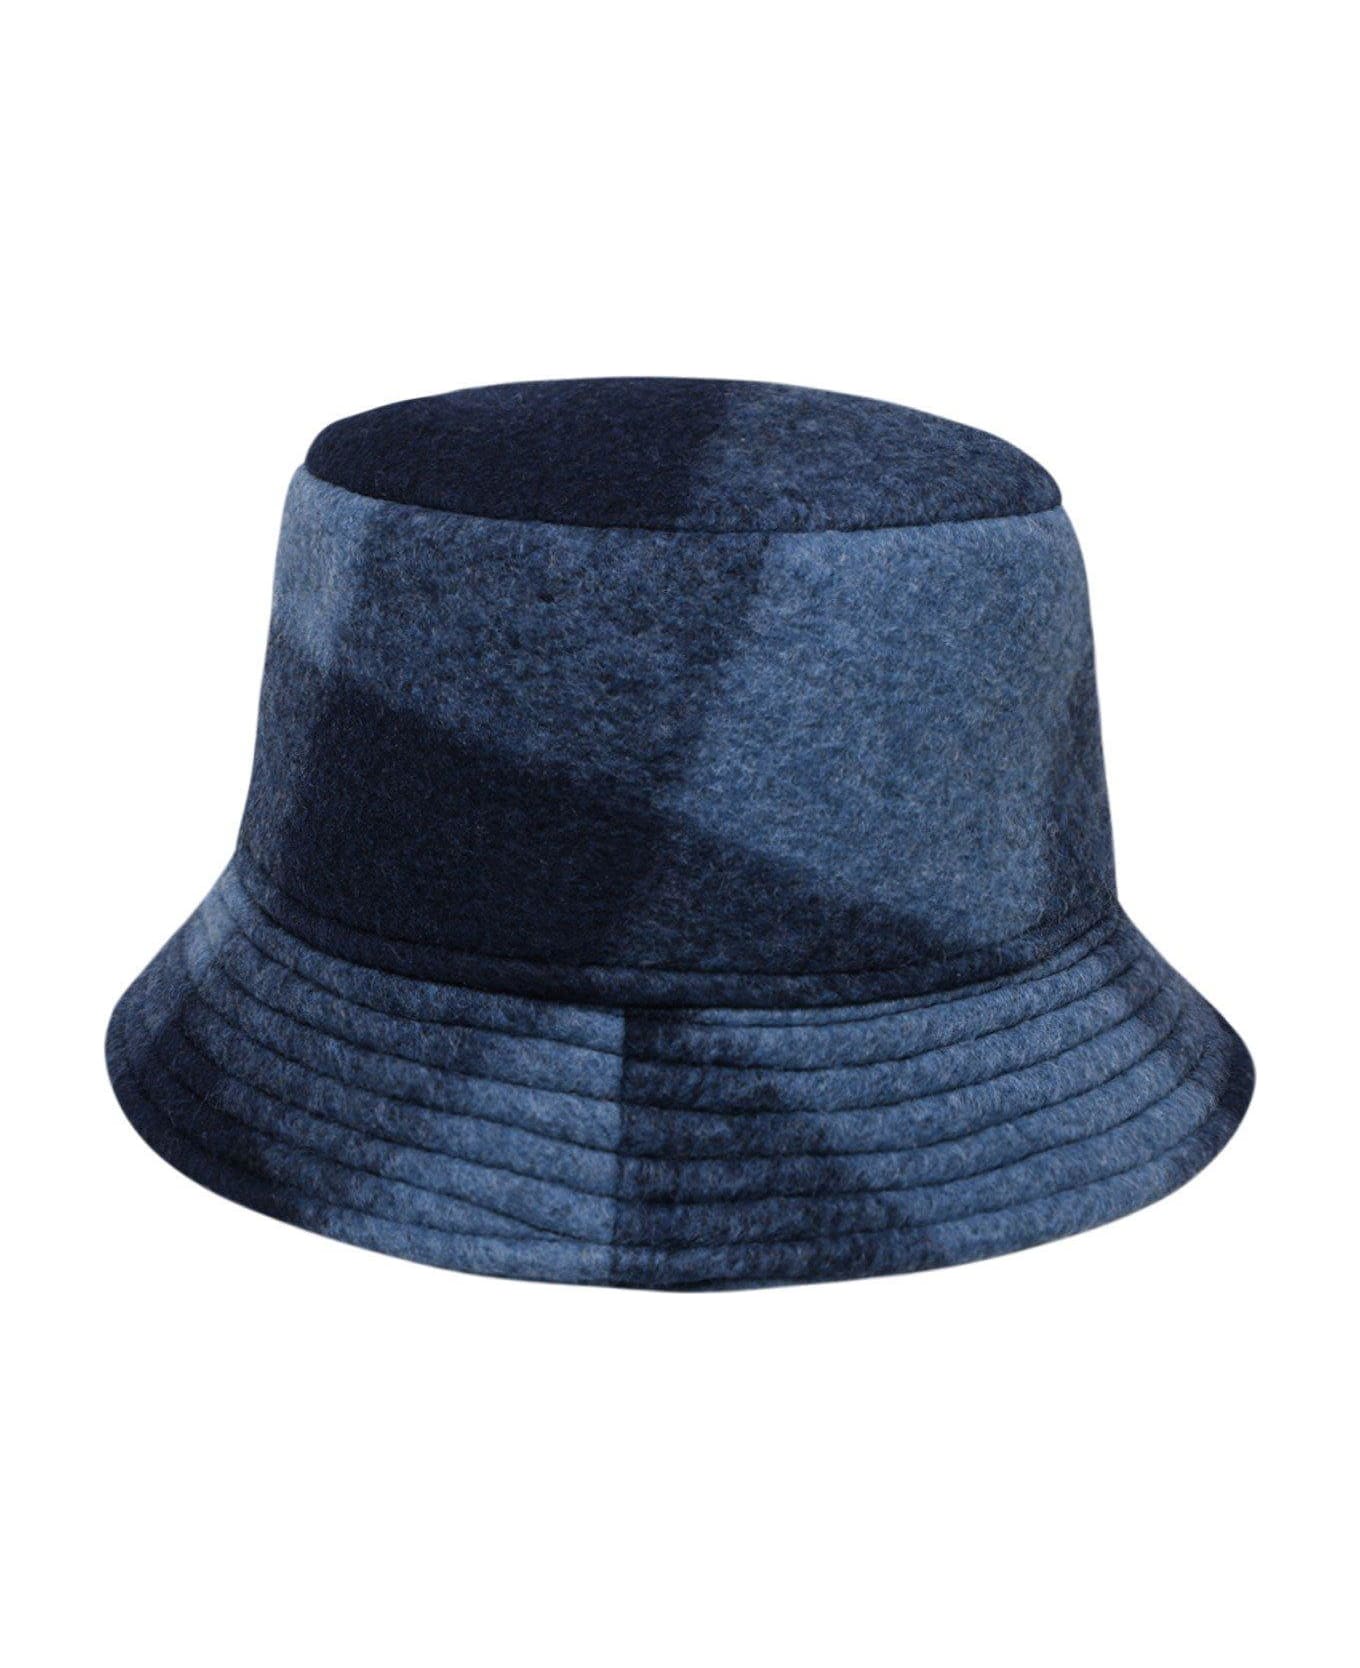 Isabel Marant Logo Embroidered Checked Hat - MIDNIGHT 帽子